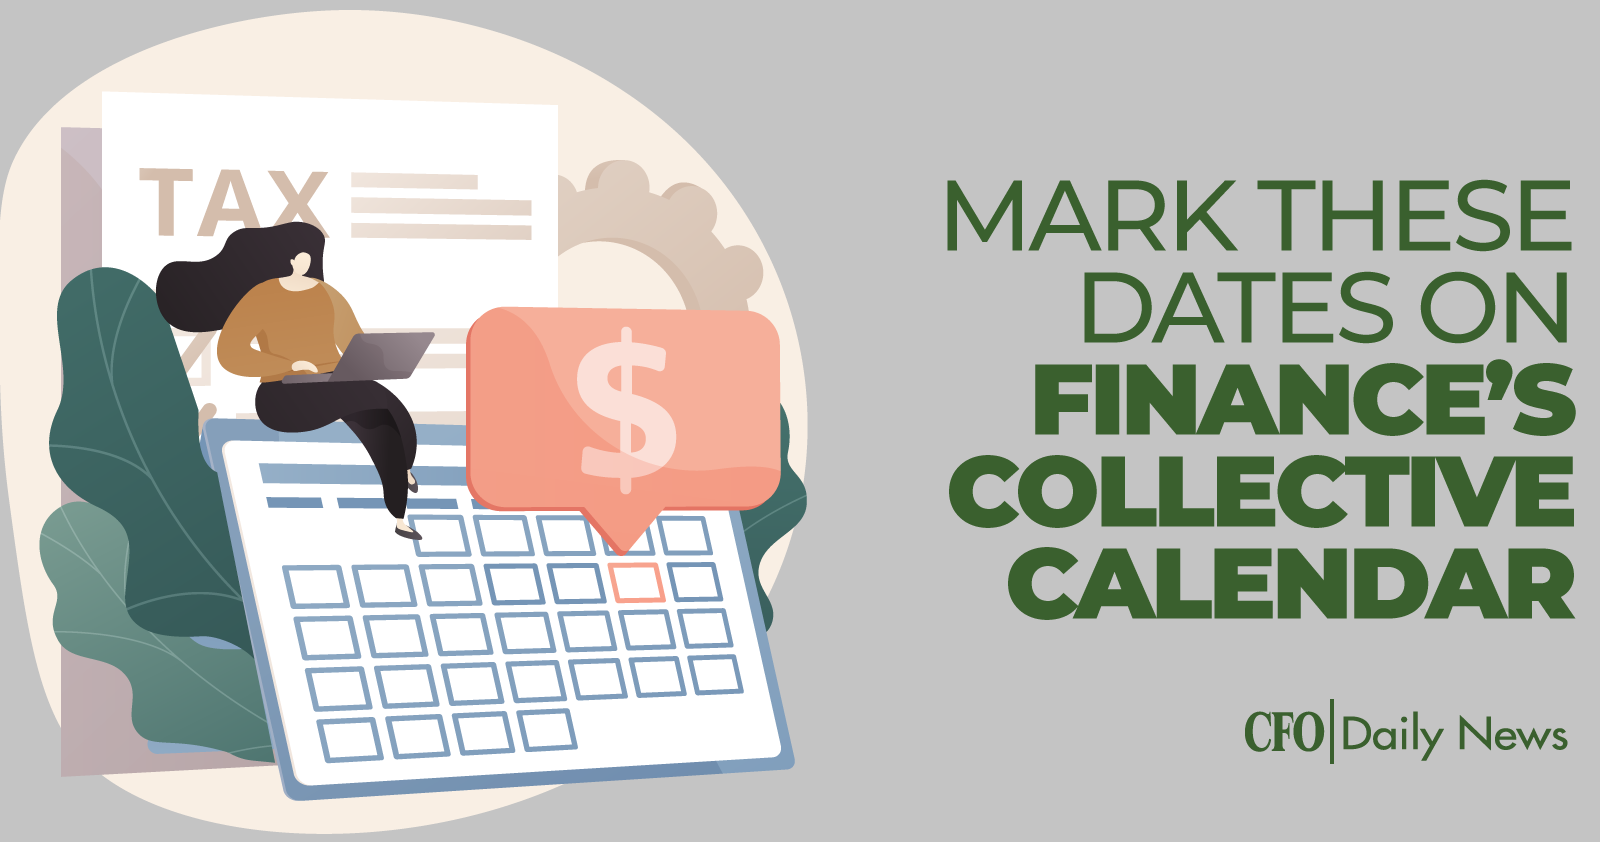 mark these dates on finances collective calendar